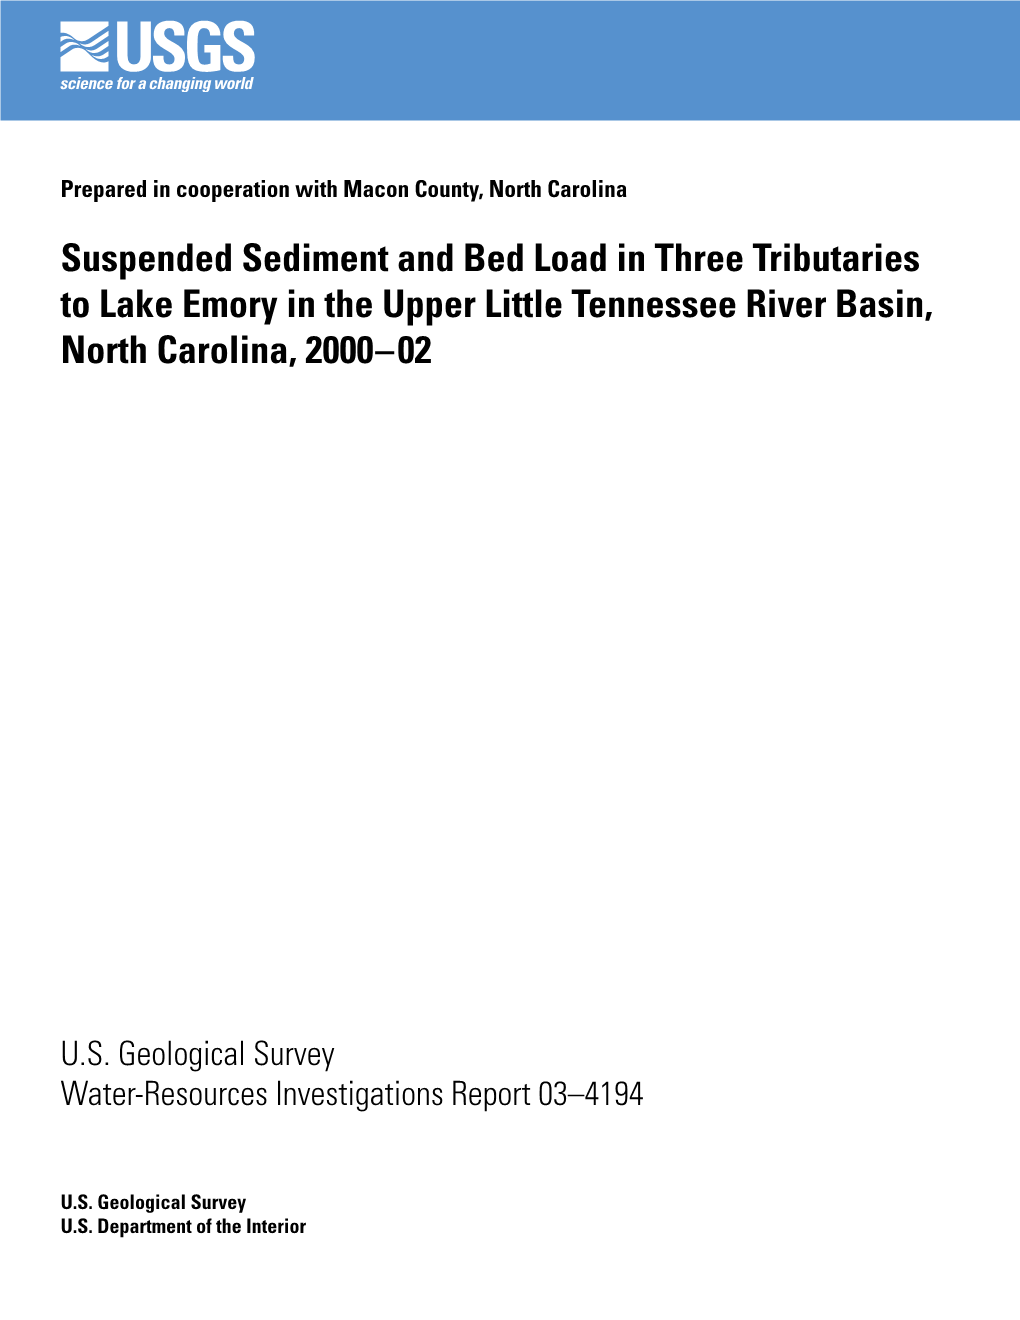 Suspended Sediment and Bed Load in Three Tributaries to Lake Emory in the Upper Little Tennessee River Basin, North Carolina, 2000 – 02